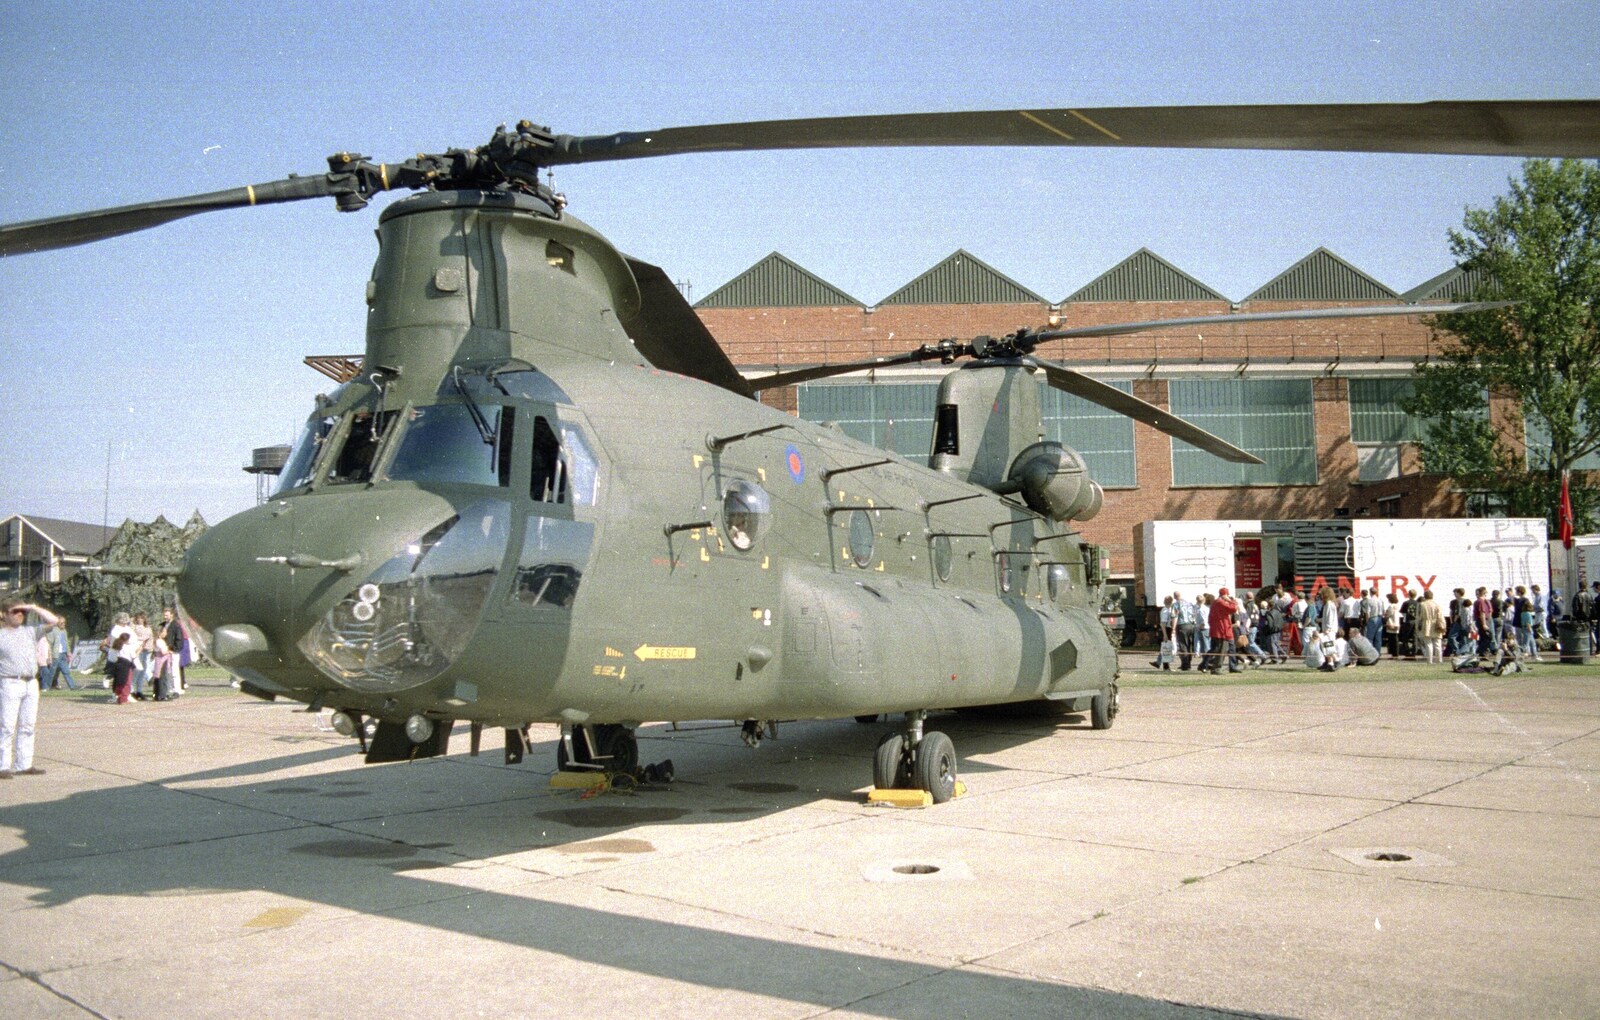 A Chinook helicopter from The Mildenhall Air Fete, Mildenhall, Suffolk - 29th May 1994